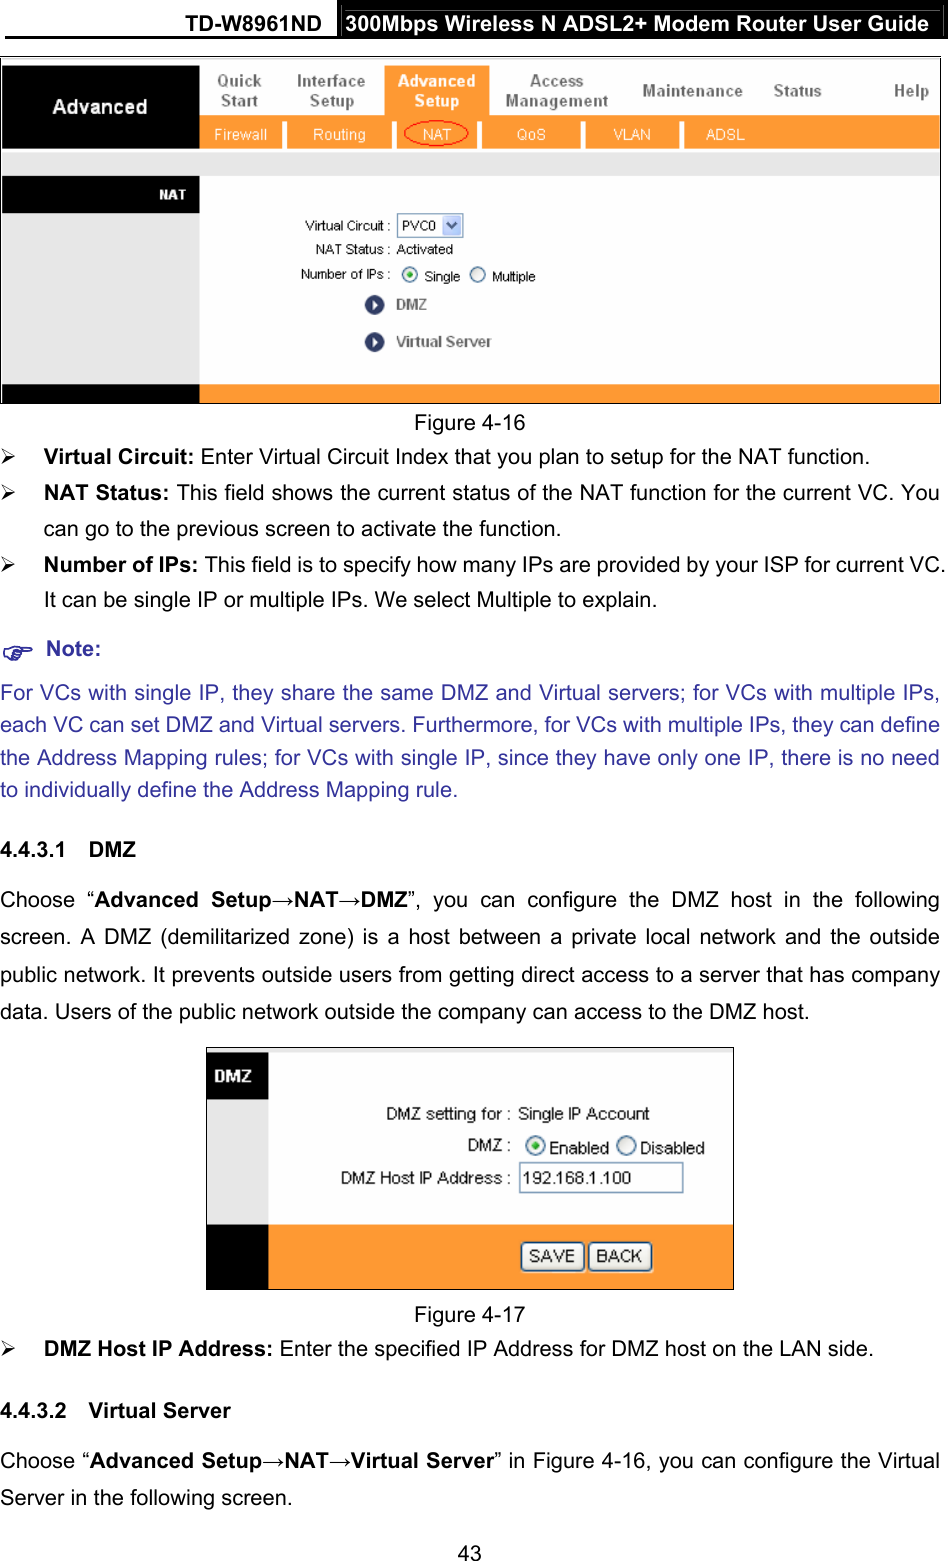 TD-W8961ND  300Mbps Wireless N ADSL2+ Modem Router User Guide  43 Figure 4-16  Virtual Circuit: Enter Virtual Circuit Index that you plan to setup for the NAT function.  NAT Status: This field shows the current status of the NAT function for the current VC. You can go to the previous screen to activate the function.  Number of IPs: This field is to specify how many IPs are provided by your ISP for current VC. It can be single IP or multiple IPs. We select Multiple to explain.  Note: For VCs with single IP, they share the same DMZ and Virtual servers; for VCs with multiple IPs, each VC can set DMZ and Virtual servers. Furthermore, for VCs with multiple IPs, they can define the Address Mapping rules; for VCs with single IP, since they have only one IP, there is no need to individually define the Address Mapping rule. 4.4.3.1 DMZ Choose “Advanced Setup→NAT→DMZ”, you can configure the DMZ host in the following screen. A DMZ (demilitarized zone) is a host between a private local network and the outside public network. It prevents outside users from getting direct access to a server that has company data. Users of the public network outside the company can access to the DMZ host.  Figure 4-17  DMZ Host IP Address: Enter the specified IP Address for DMZ host on the LAN side. 4.4.3.2 Virtual Server Choose “Advanced Setup→NAT→Virtual Server” in Figure 4-16, you can configure the Virtual Server in the following screen.   